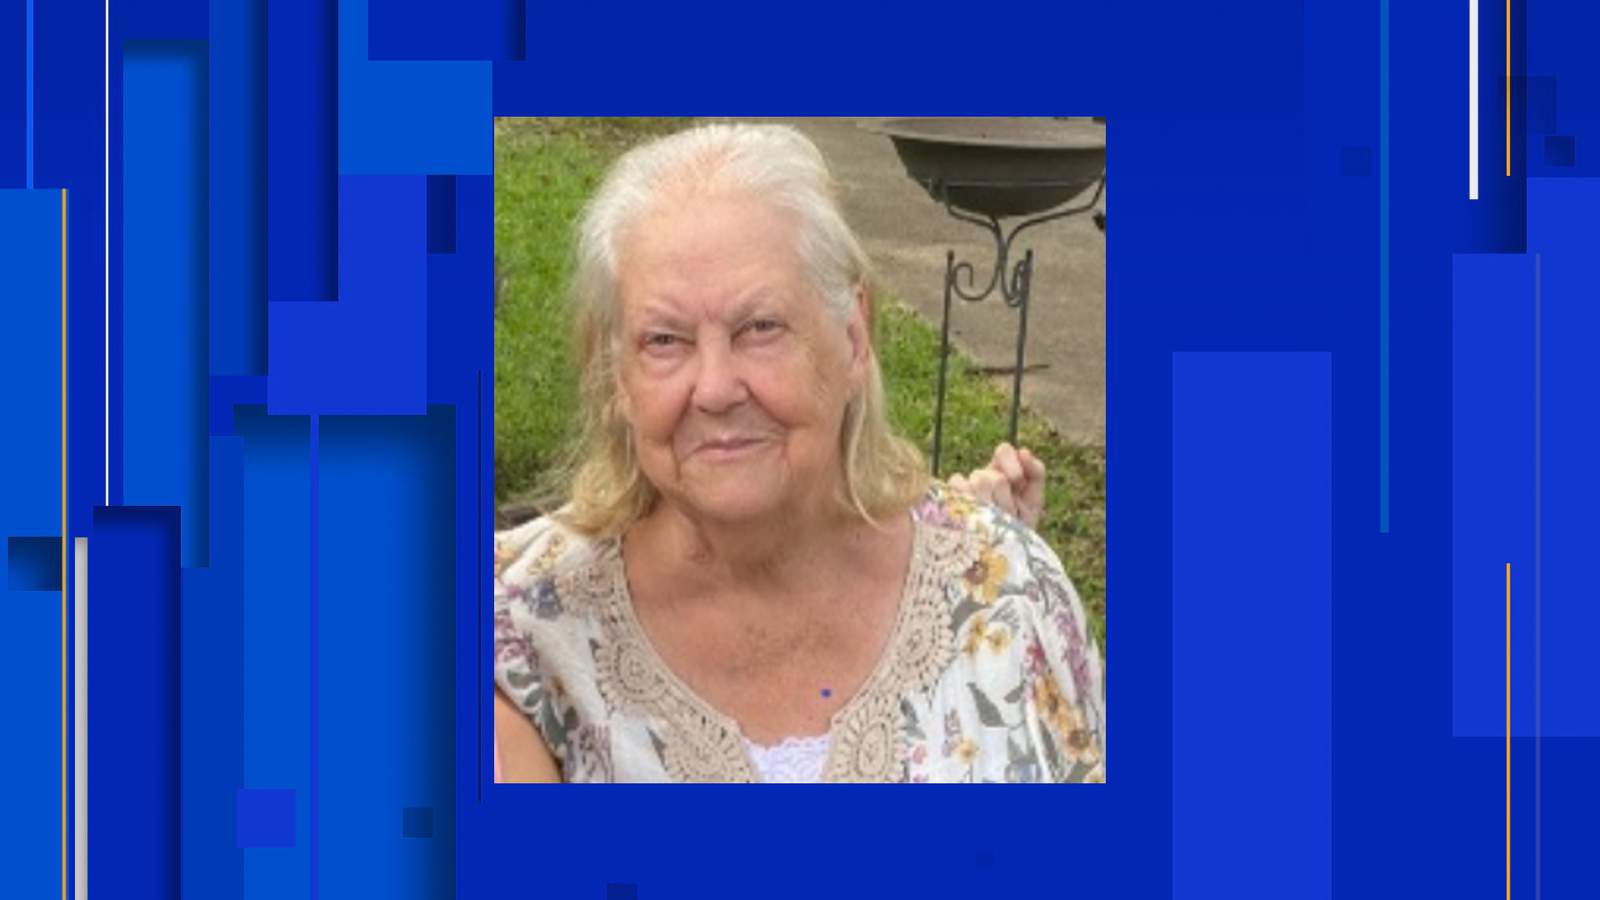 Silver Alert issued for missing 76-year-old woman in Harris County